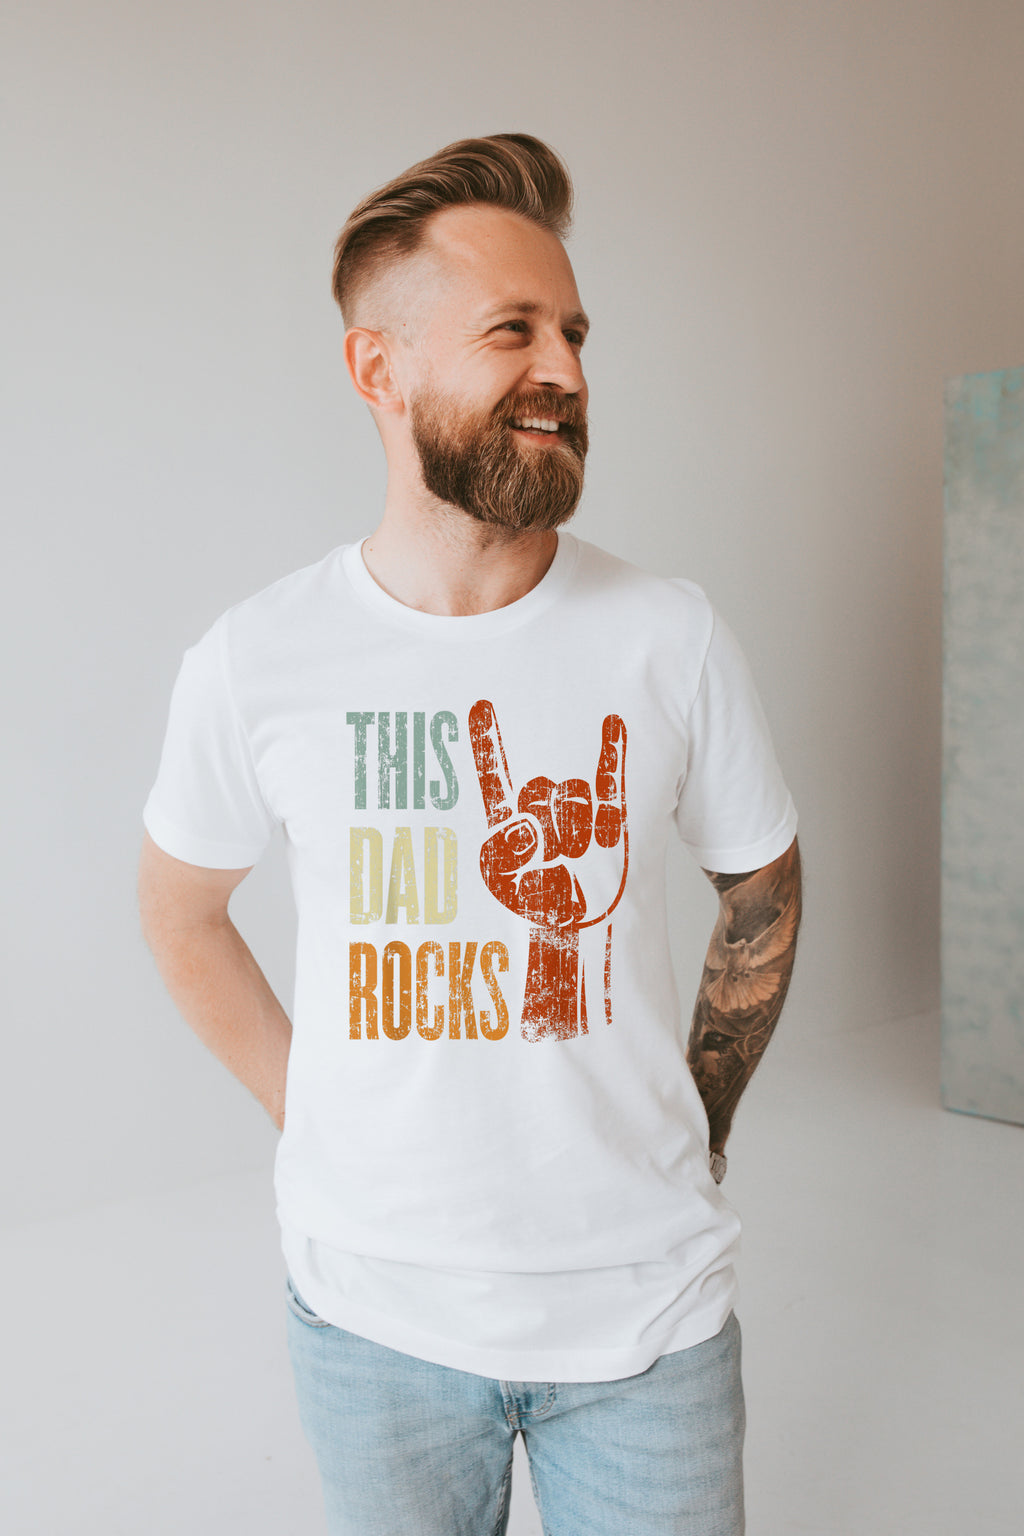 Dad rocks rock n roll dad shirt Father's Day gift for Daddy Funny Dad shirt gift idea for father 